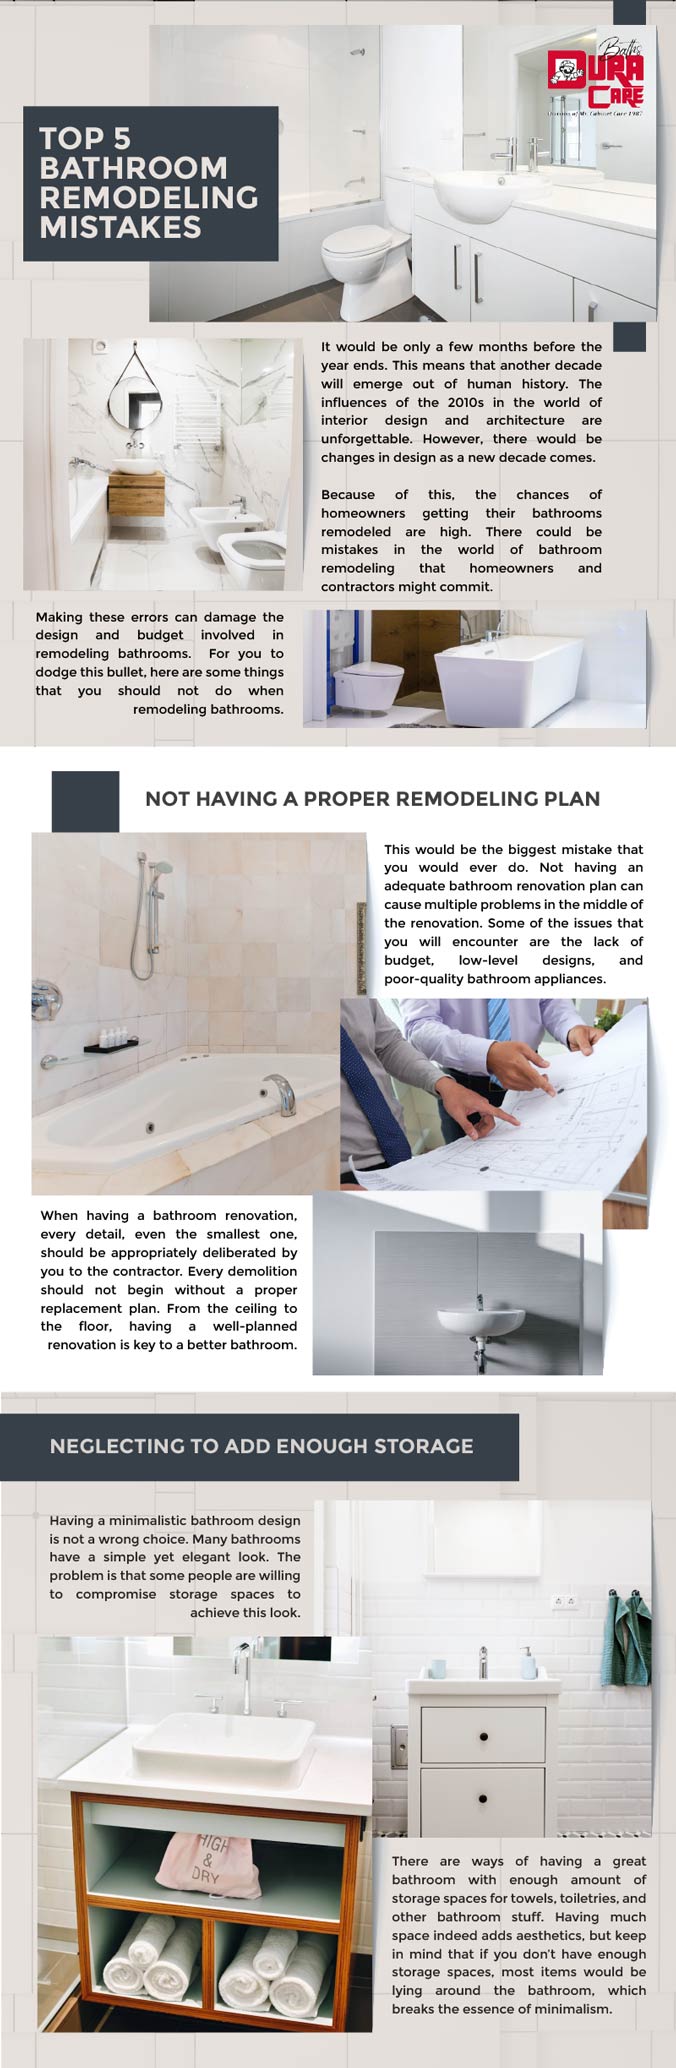 Infographic: Top 5 bathroom remodeling mistakes 5